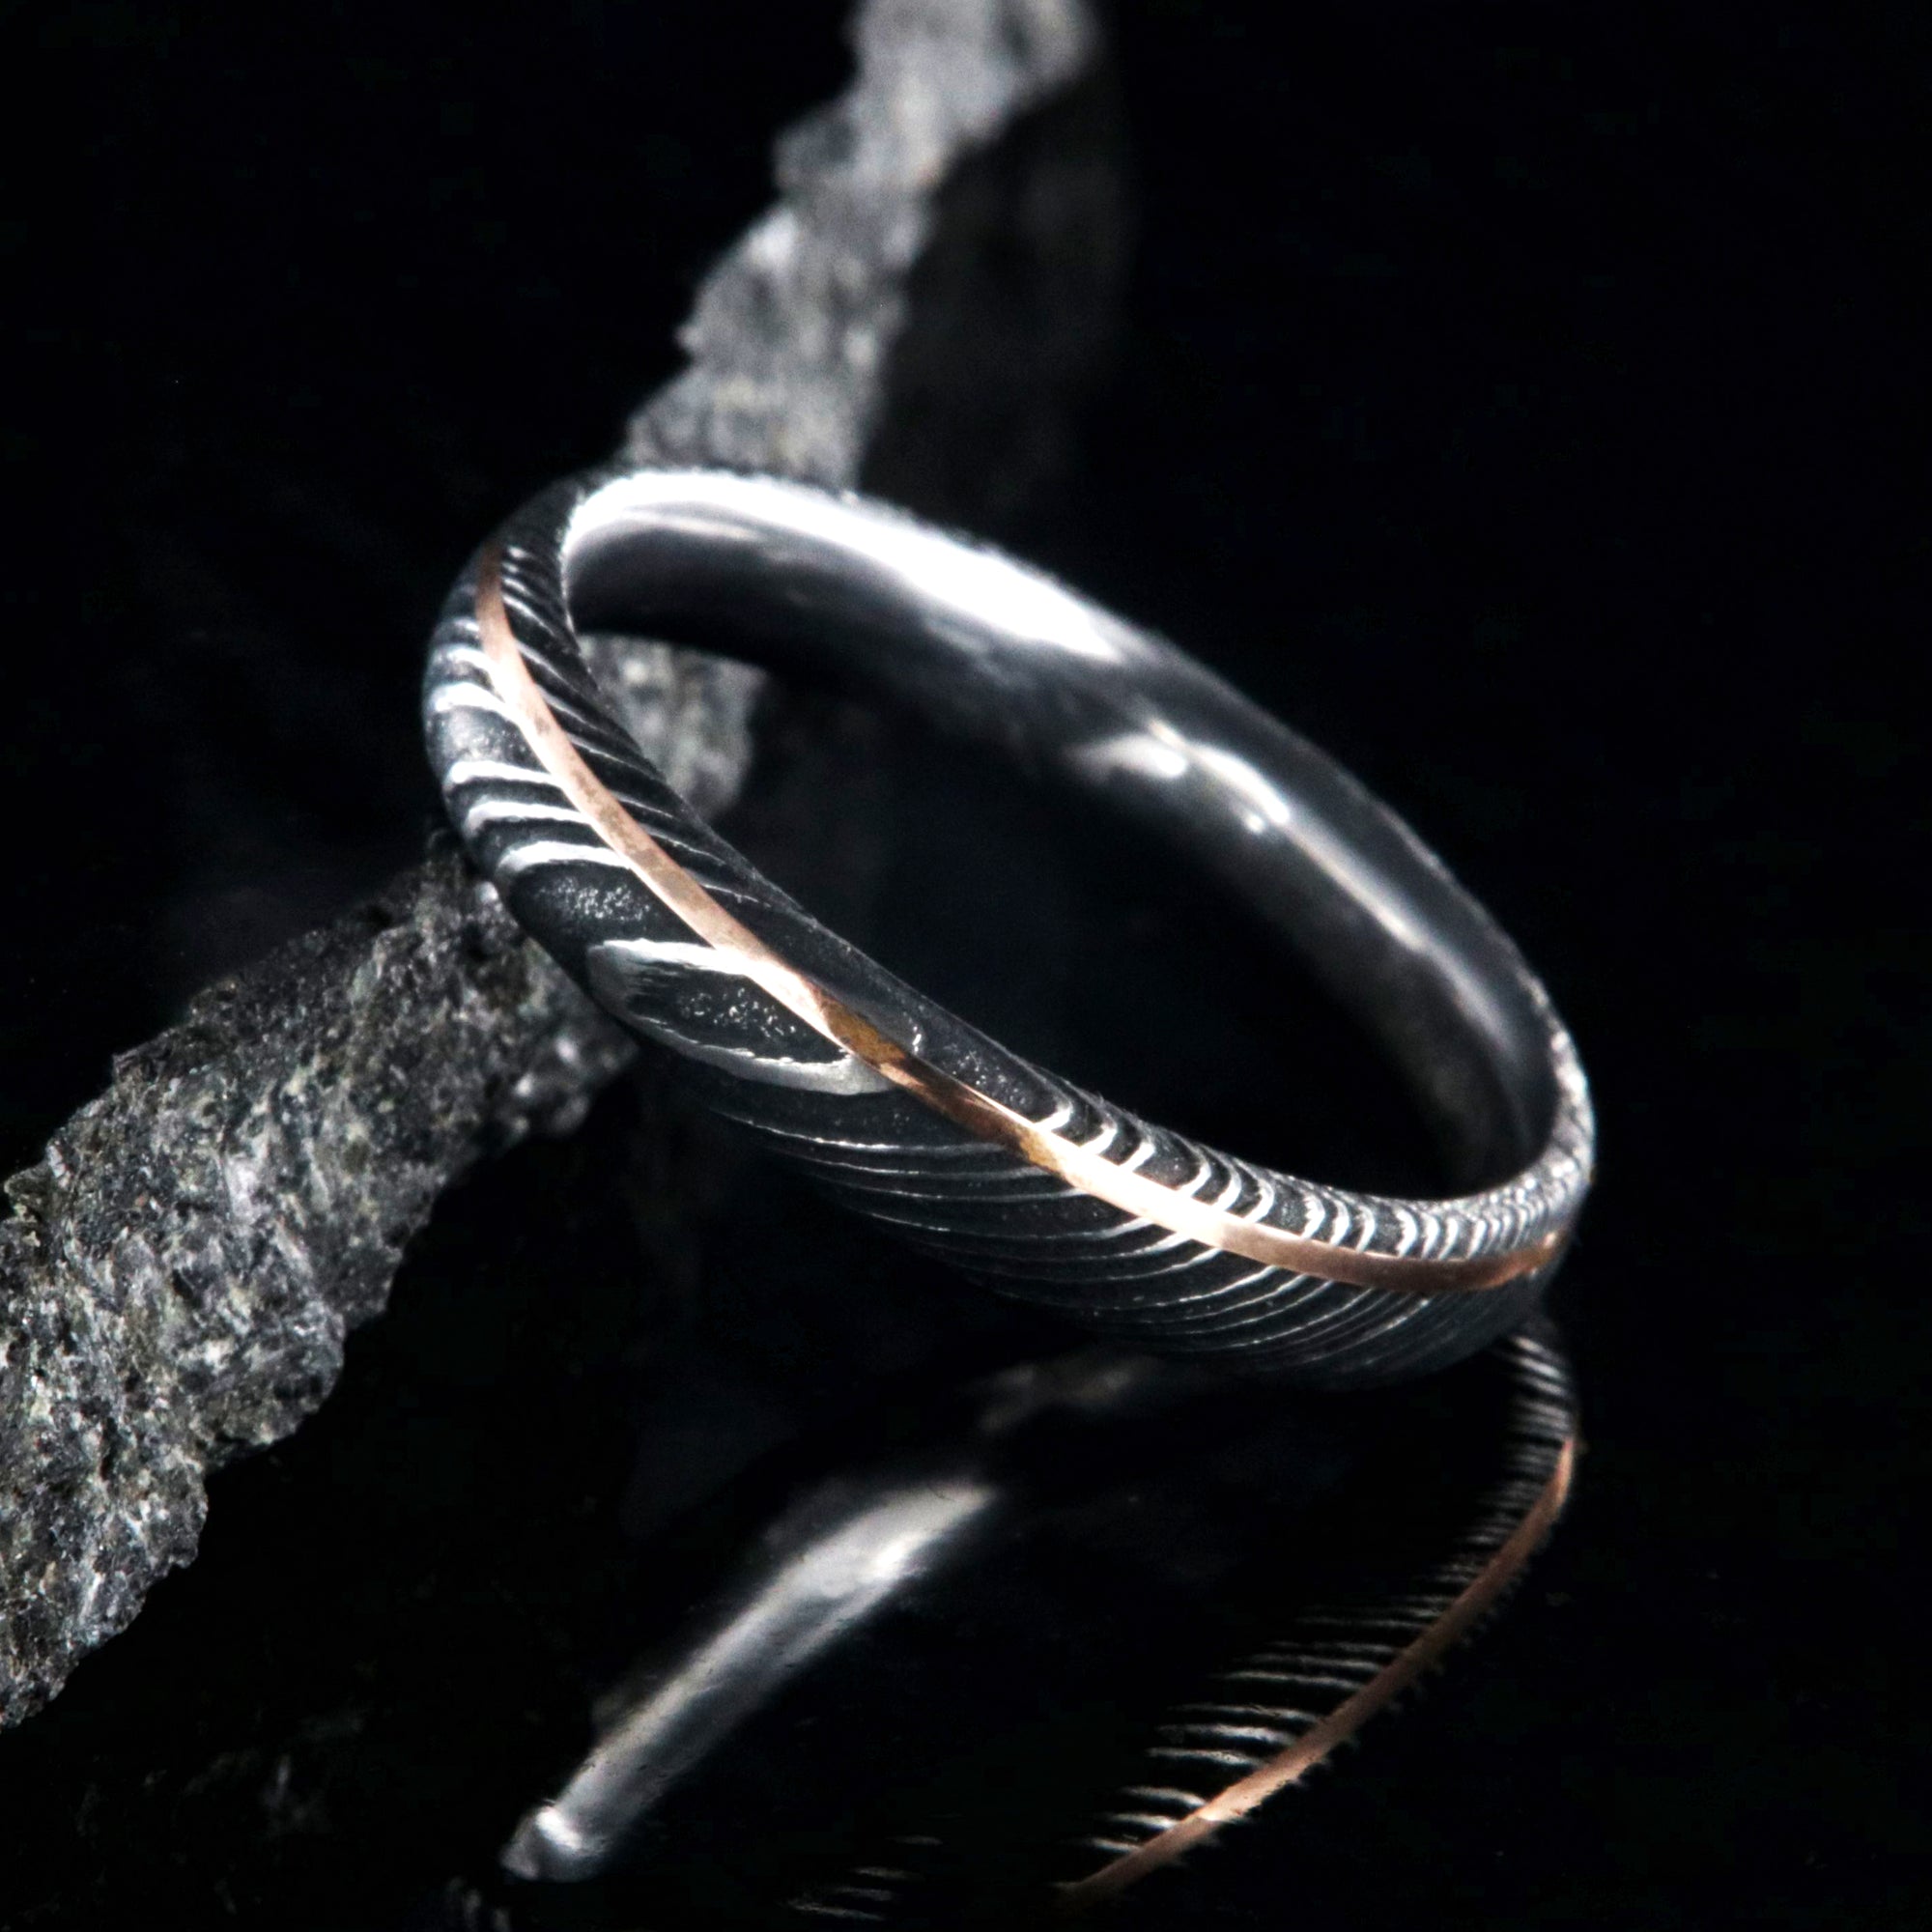 4mm wide black Damascus steel ring with ultra thin rose gold off-center inlay with polished inside